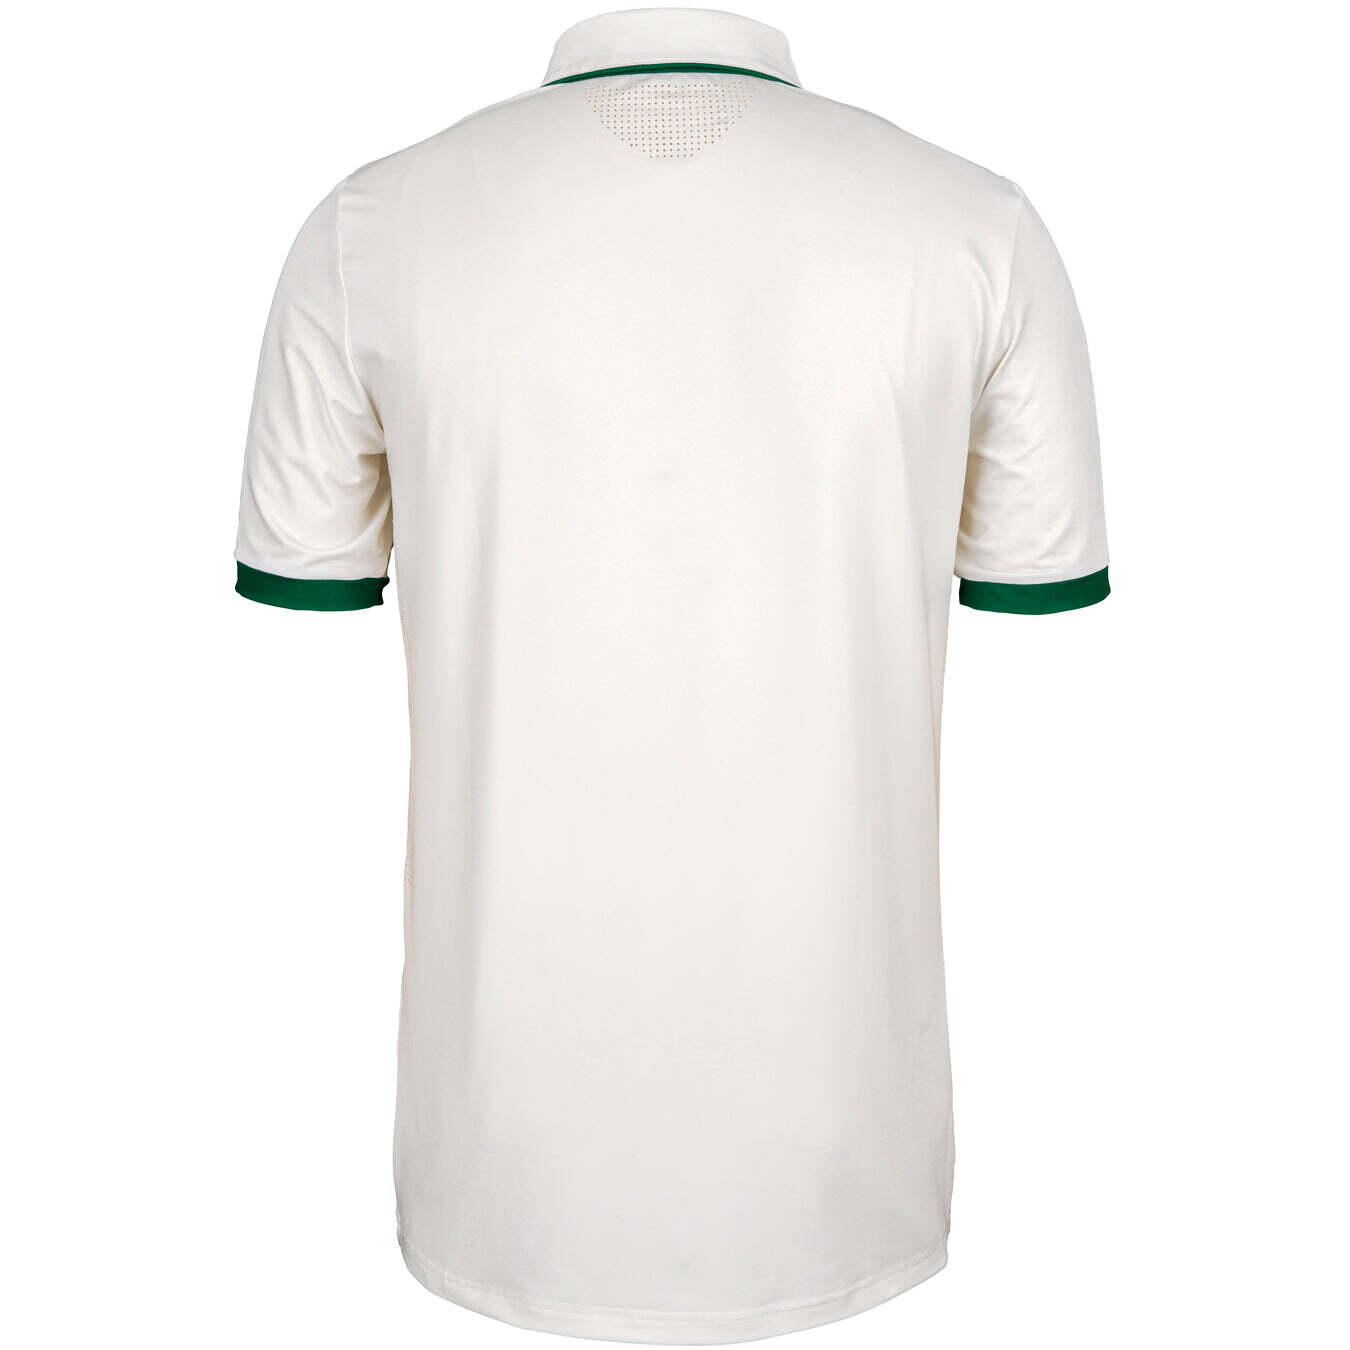 Pro Performance S/S Playing Shirt,Ivory/Green,Adult 2/3